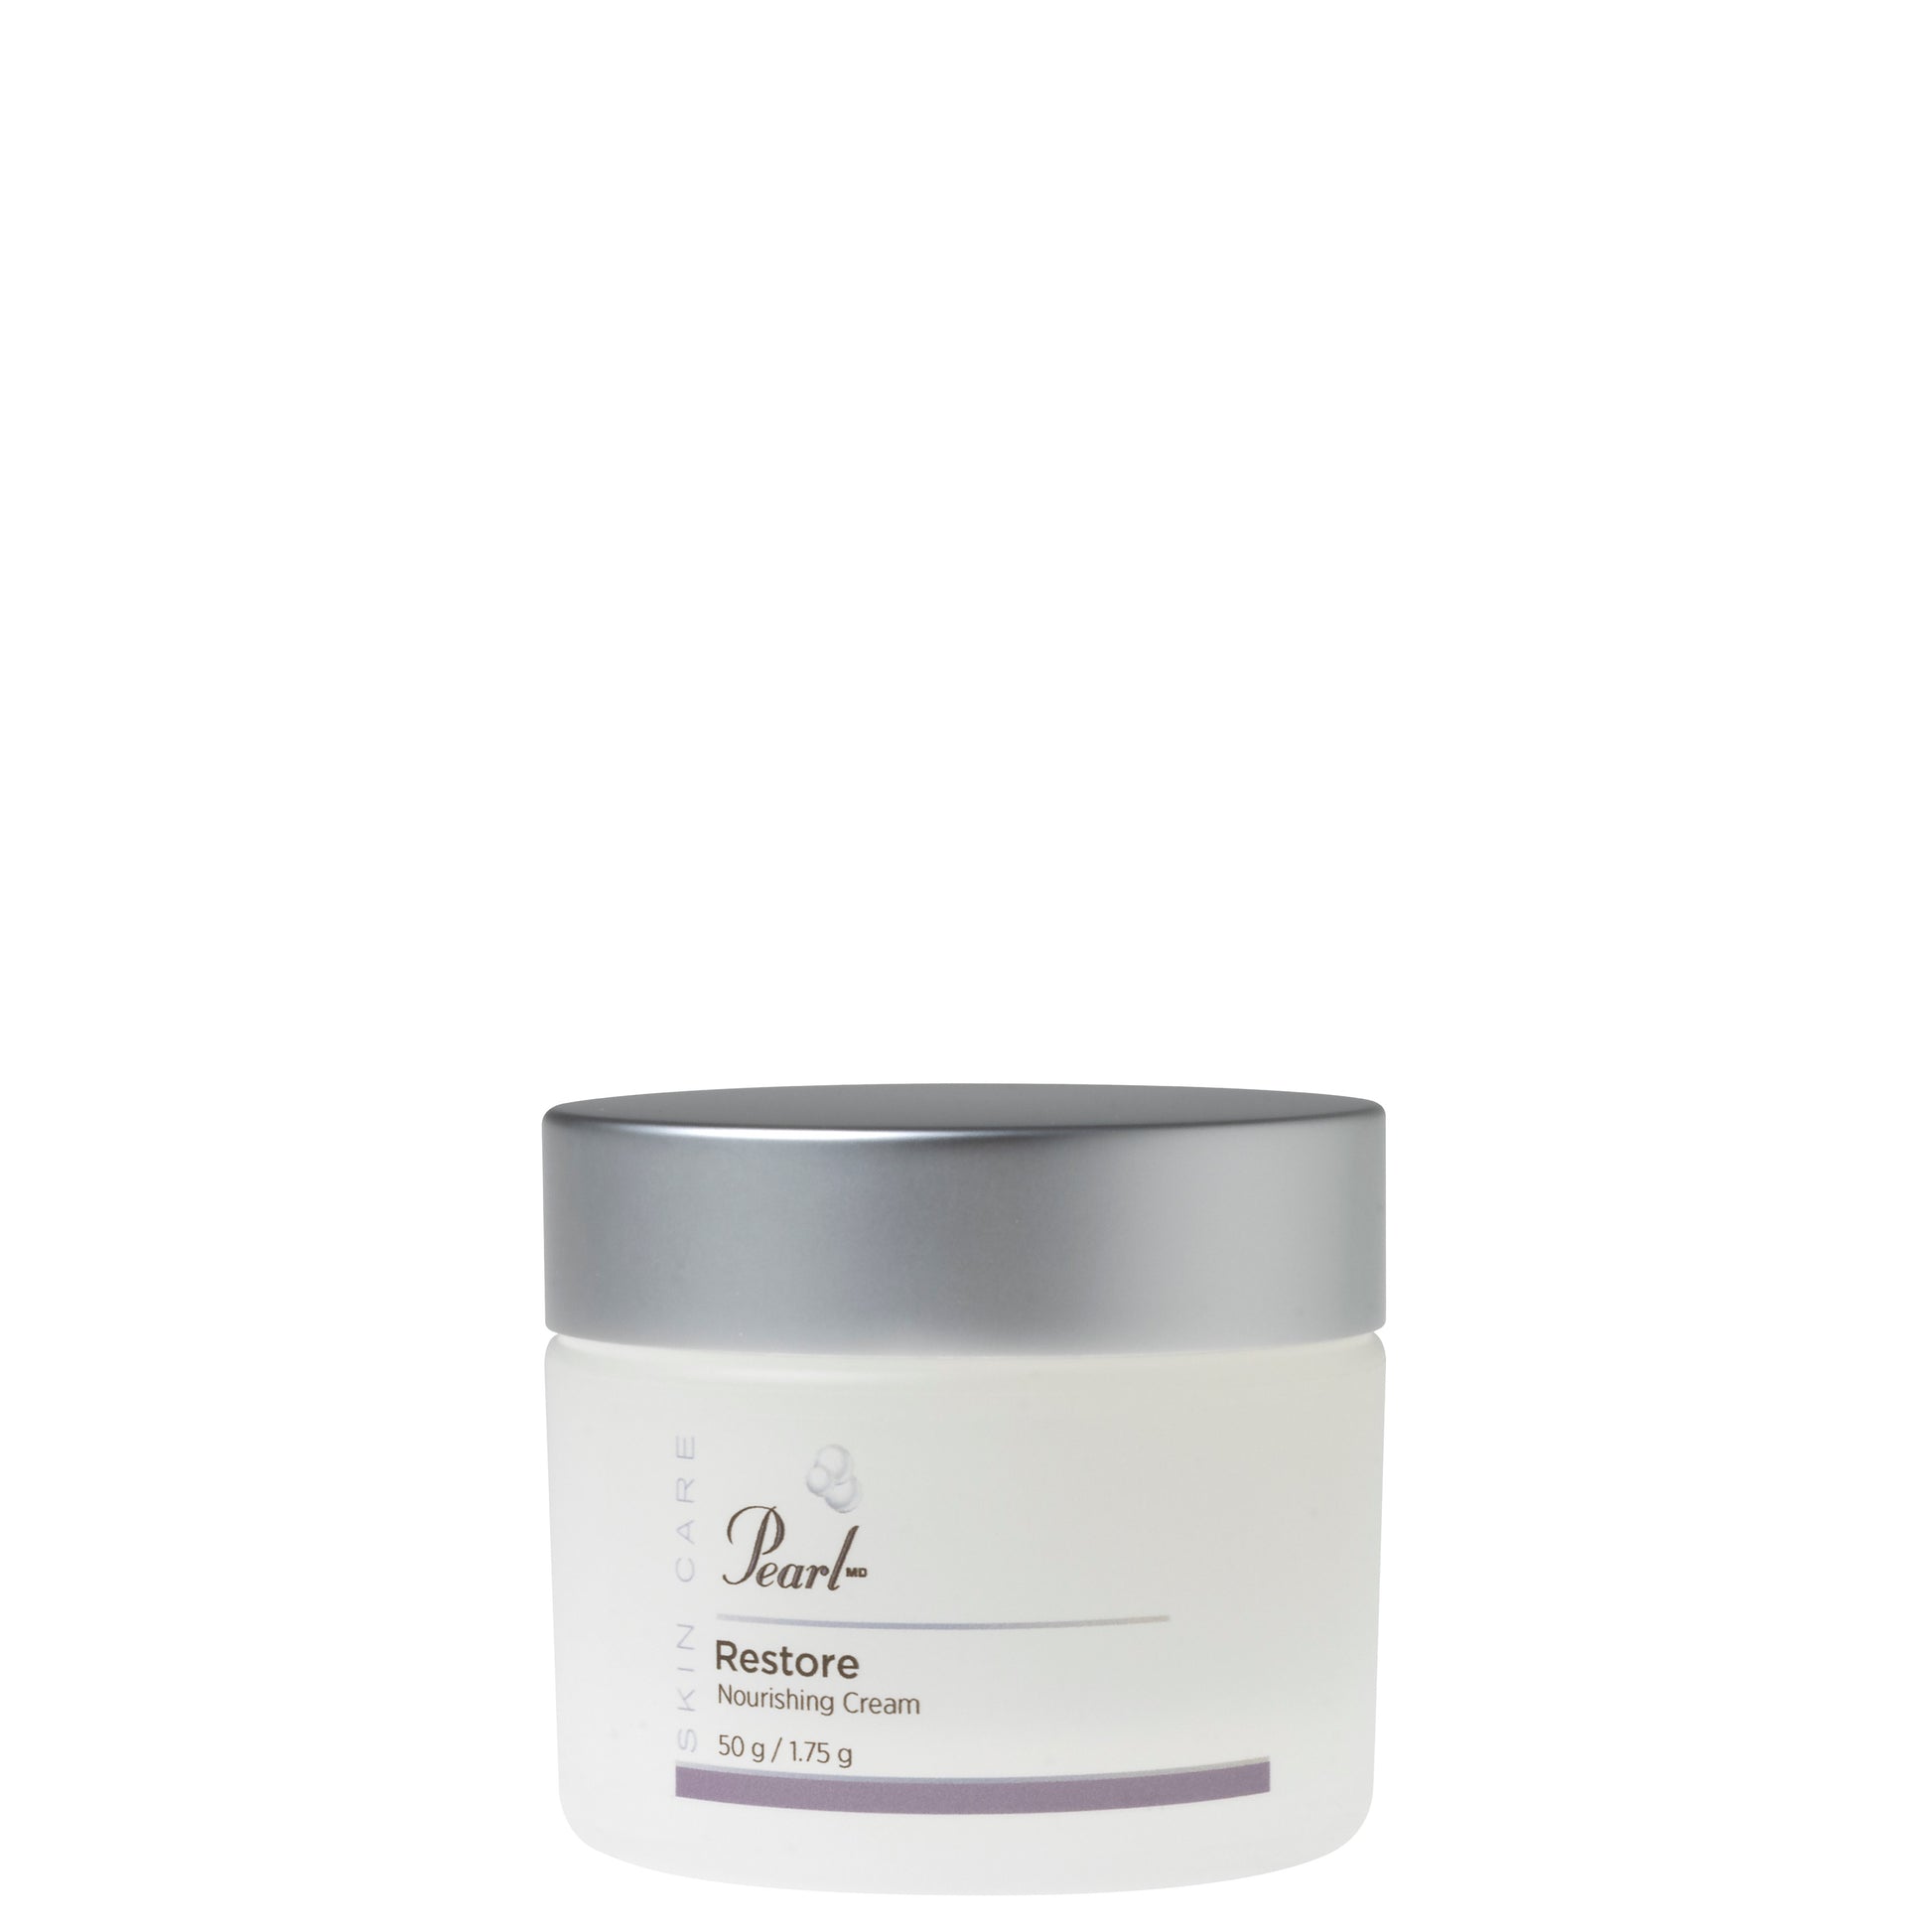 PearlMD Skincare Restore Nourishing Complex contains a rich blend of hydrating humectants and moisturizers including hyaluronic acid, barrier restorative lipids and peptides